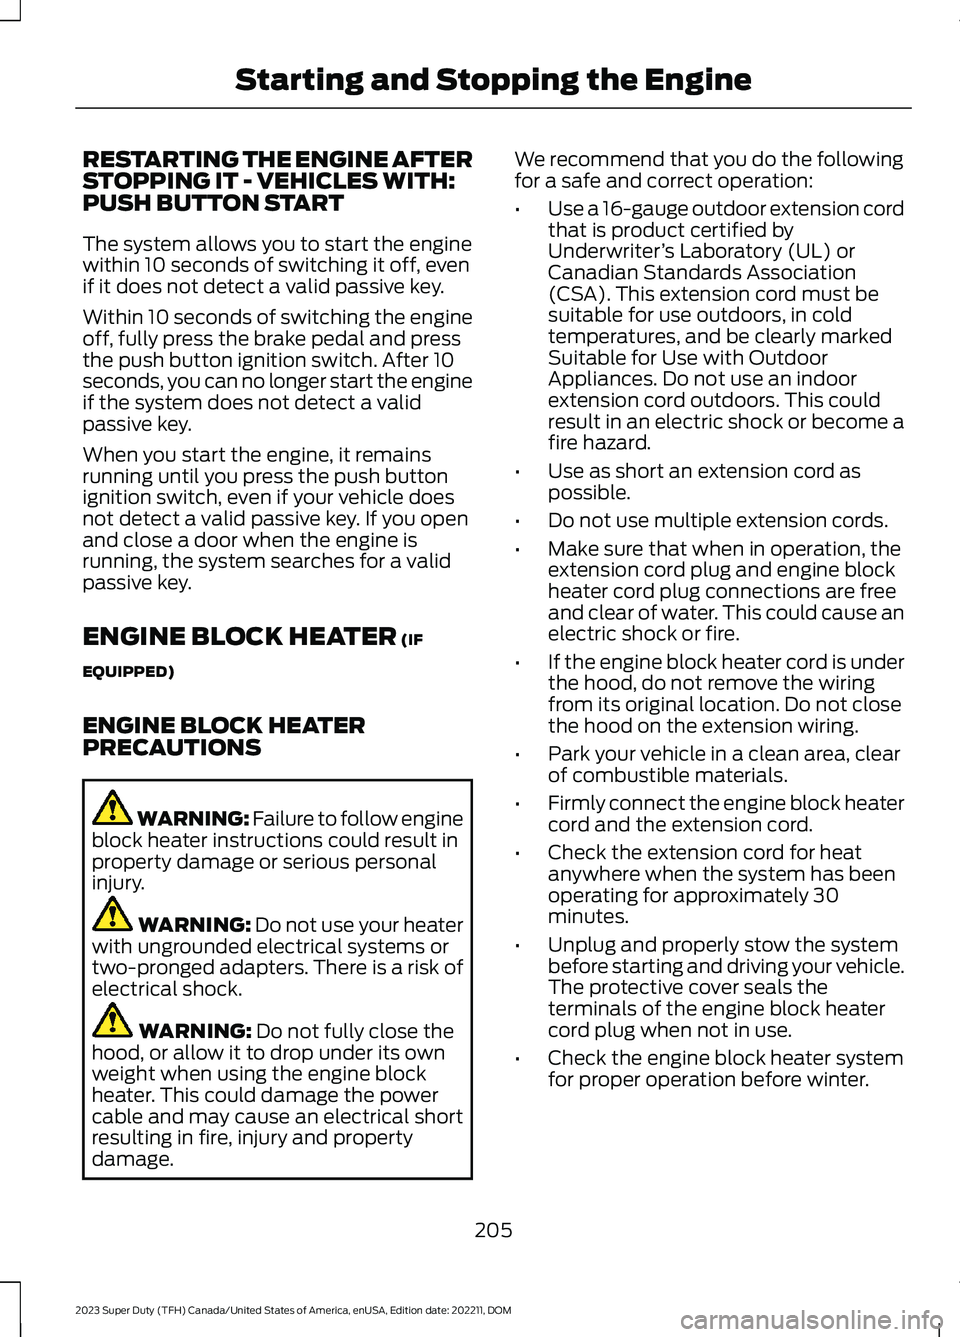 FORD SUPER DUTY 2023  Owners Manual RESTARTING THE ENGINE AFTERSTOPPING IT - VEHICLES WITH:PUSH BUTTON START
The system allows you to start the enginewithin 10 seconds of switching it off, evenif it does not detect a valid passive key.
